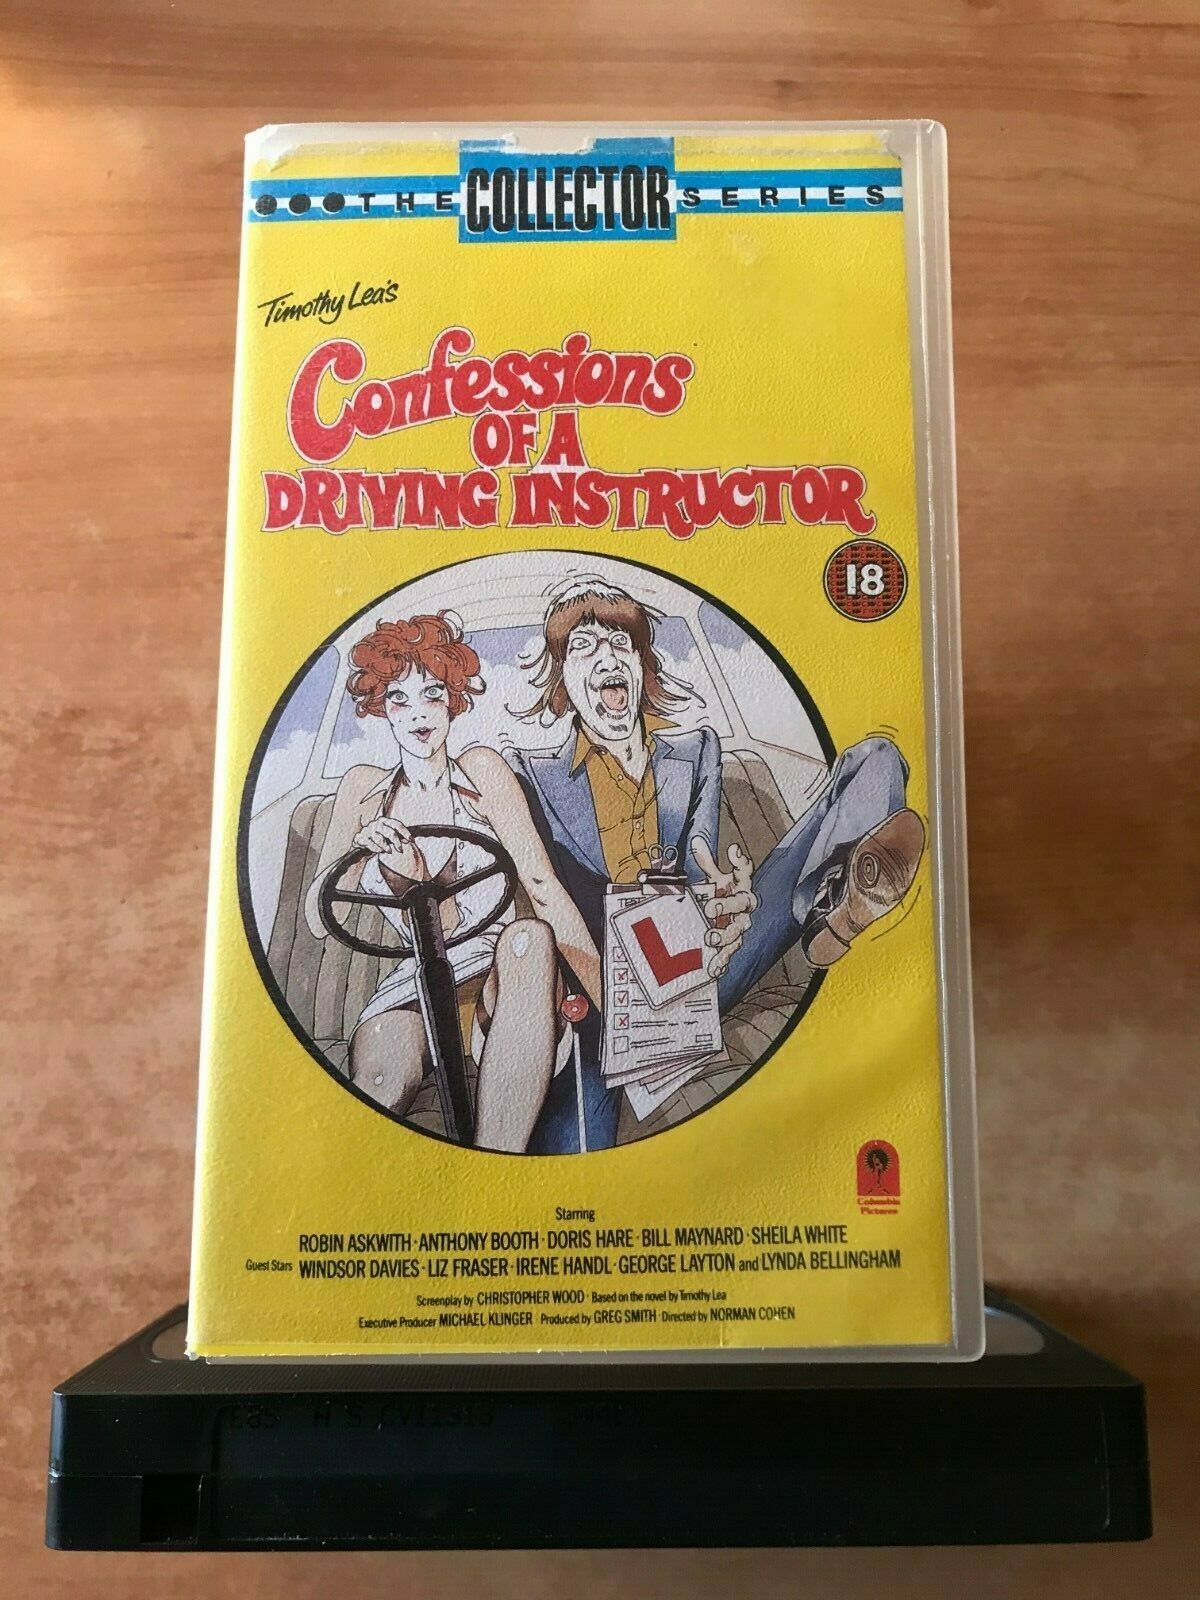 Confessions Of A Driving Instructor (1976): Adult Comedy [Timothy Lea] Pal VHS-